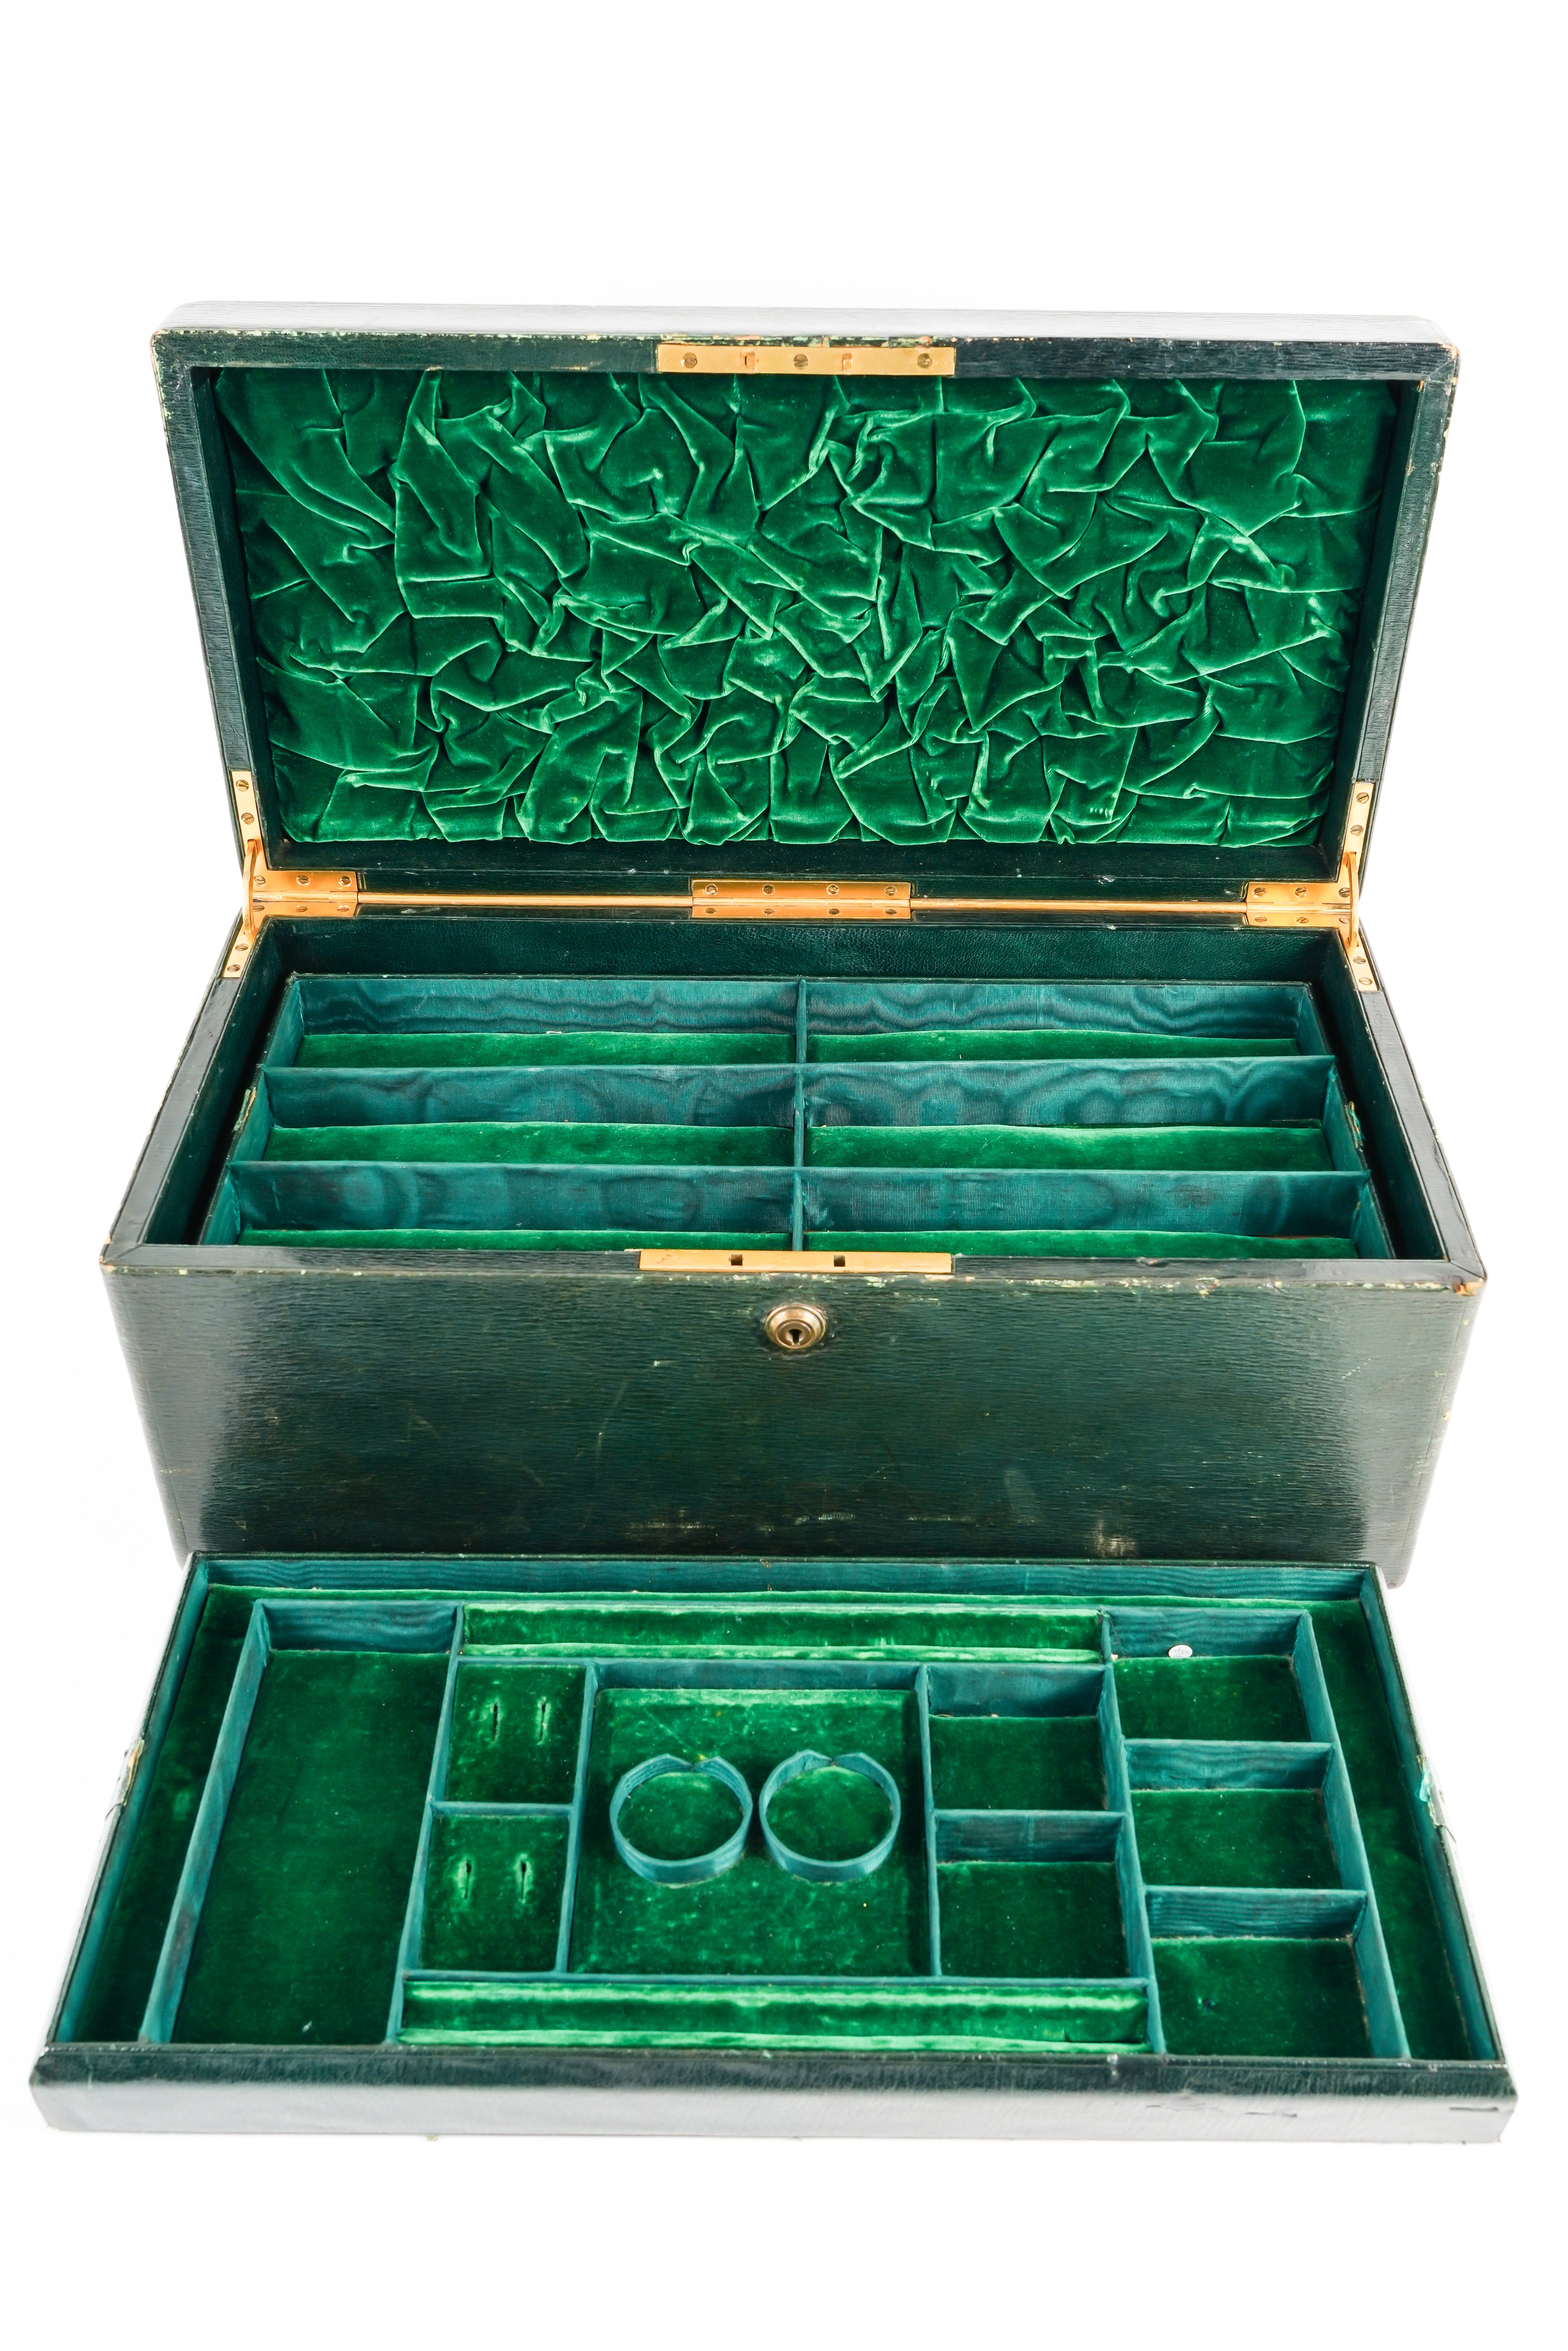 A LARGE 19TH CENTURY GREEN MOROCCO LEATHER JEWELLERY CASE - Image 4 of 5